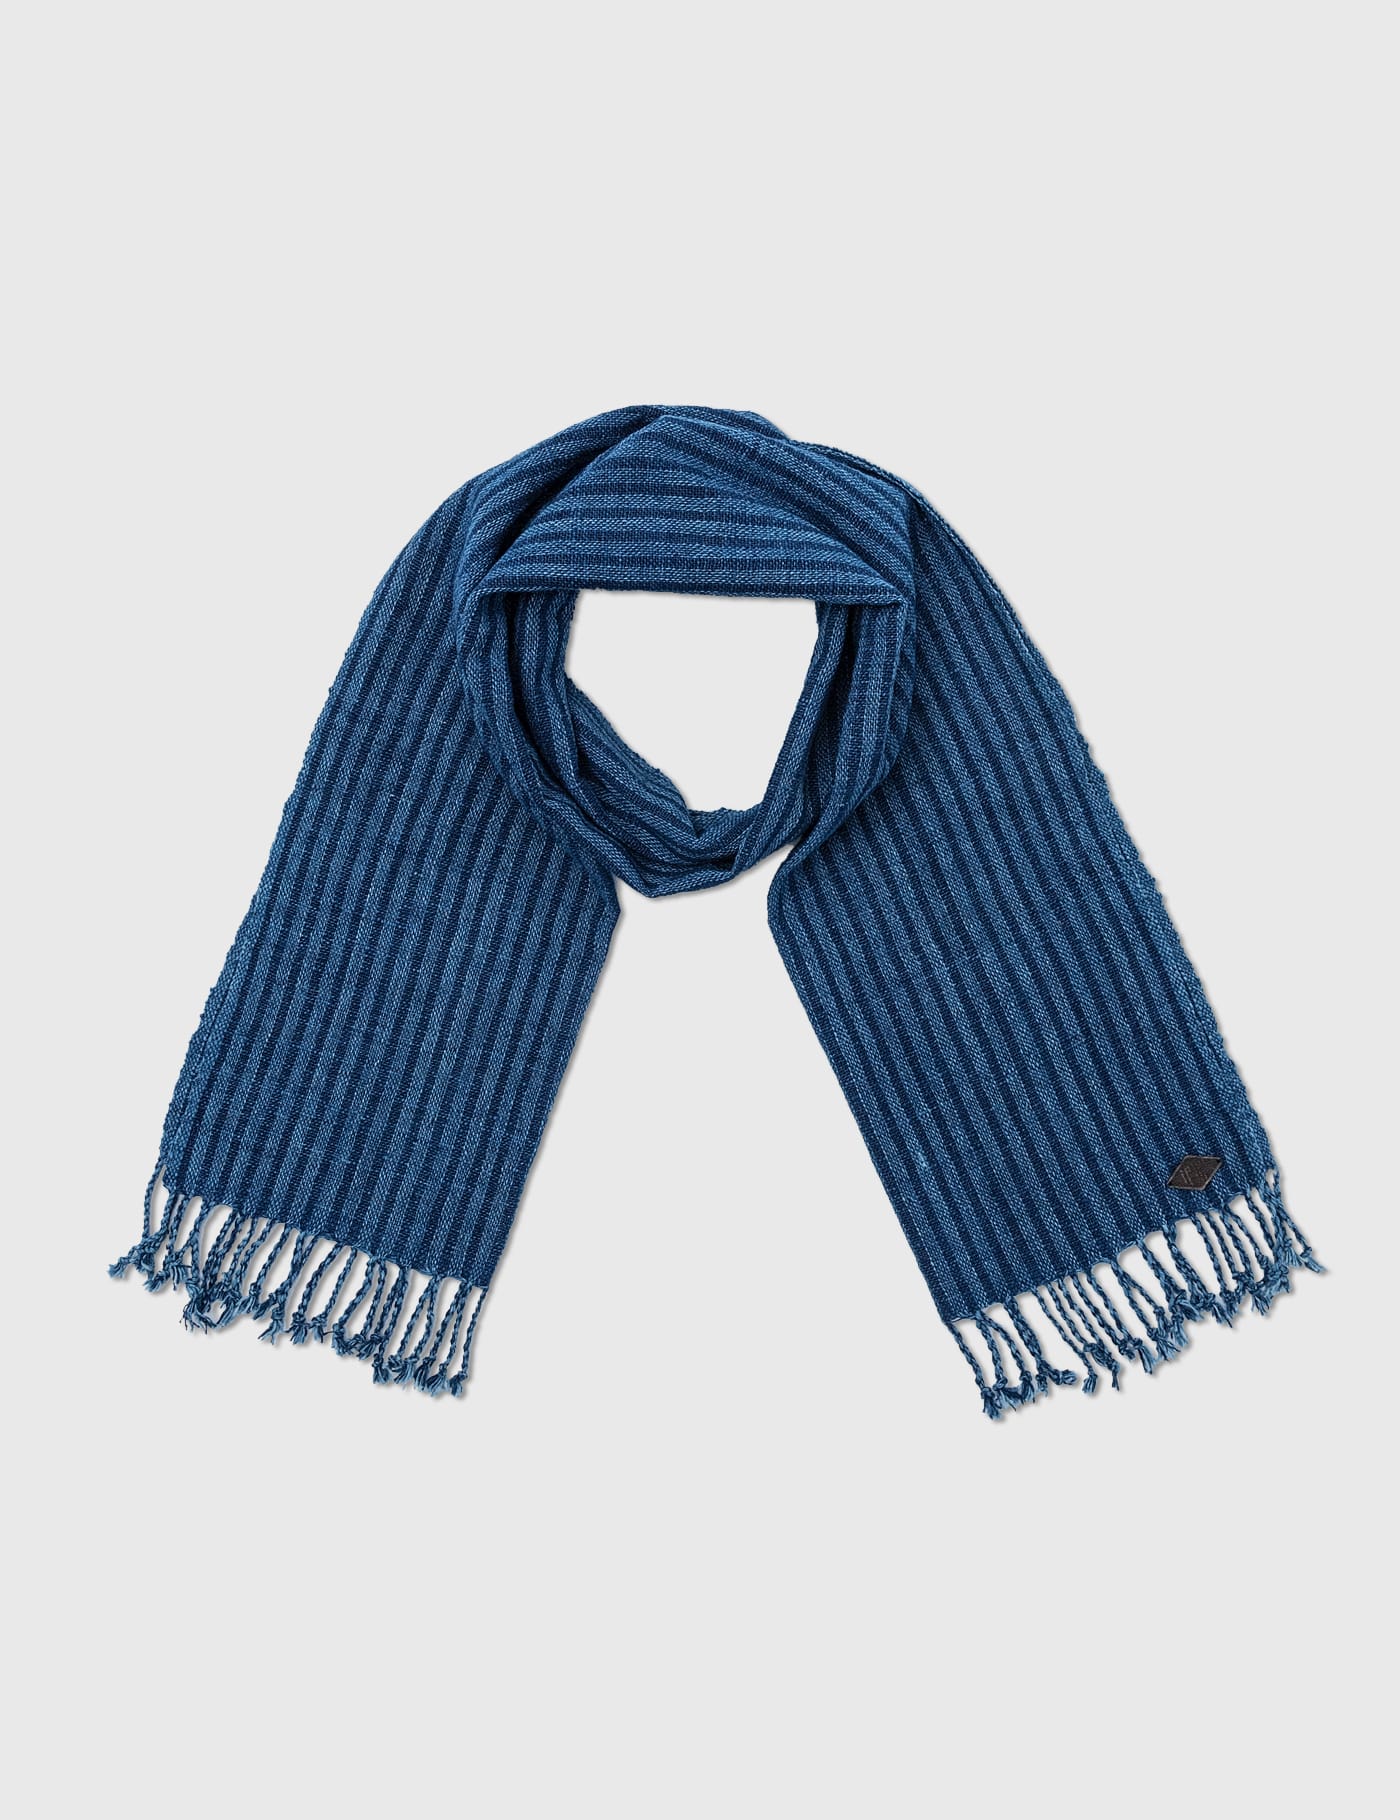 Scarves   HBX   Globally Curated Fashion and Lifestyle by Hypebeast